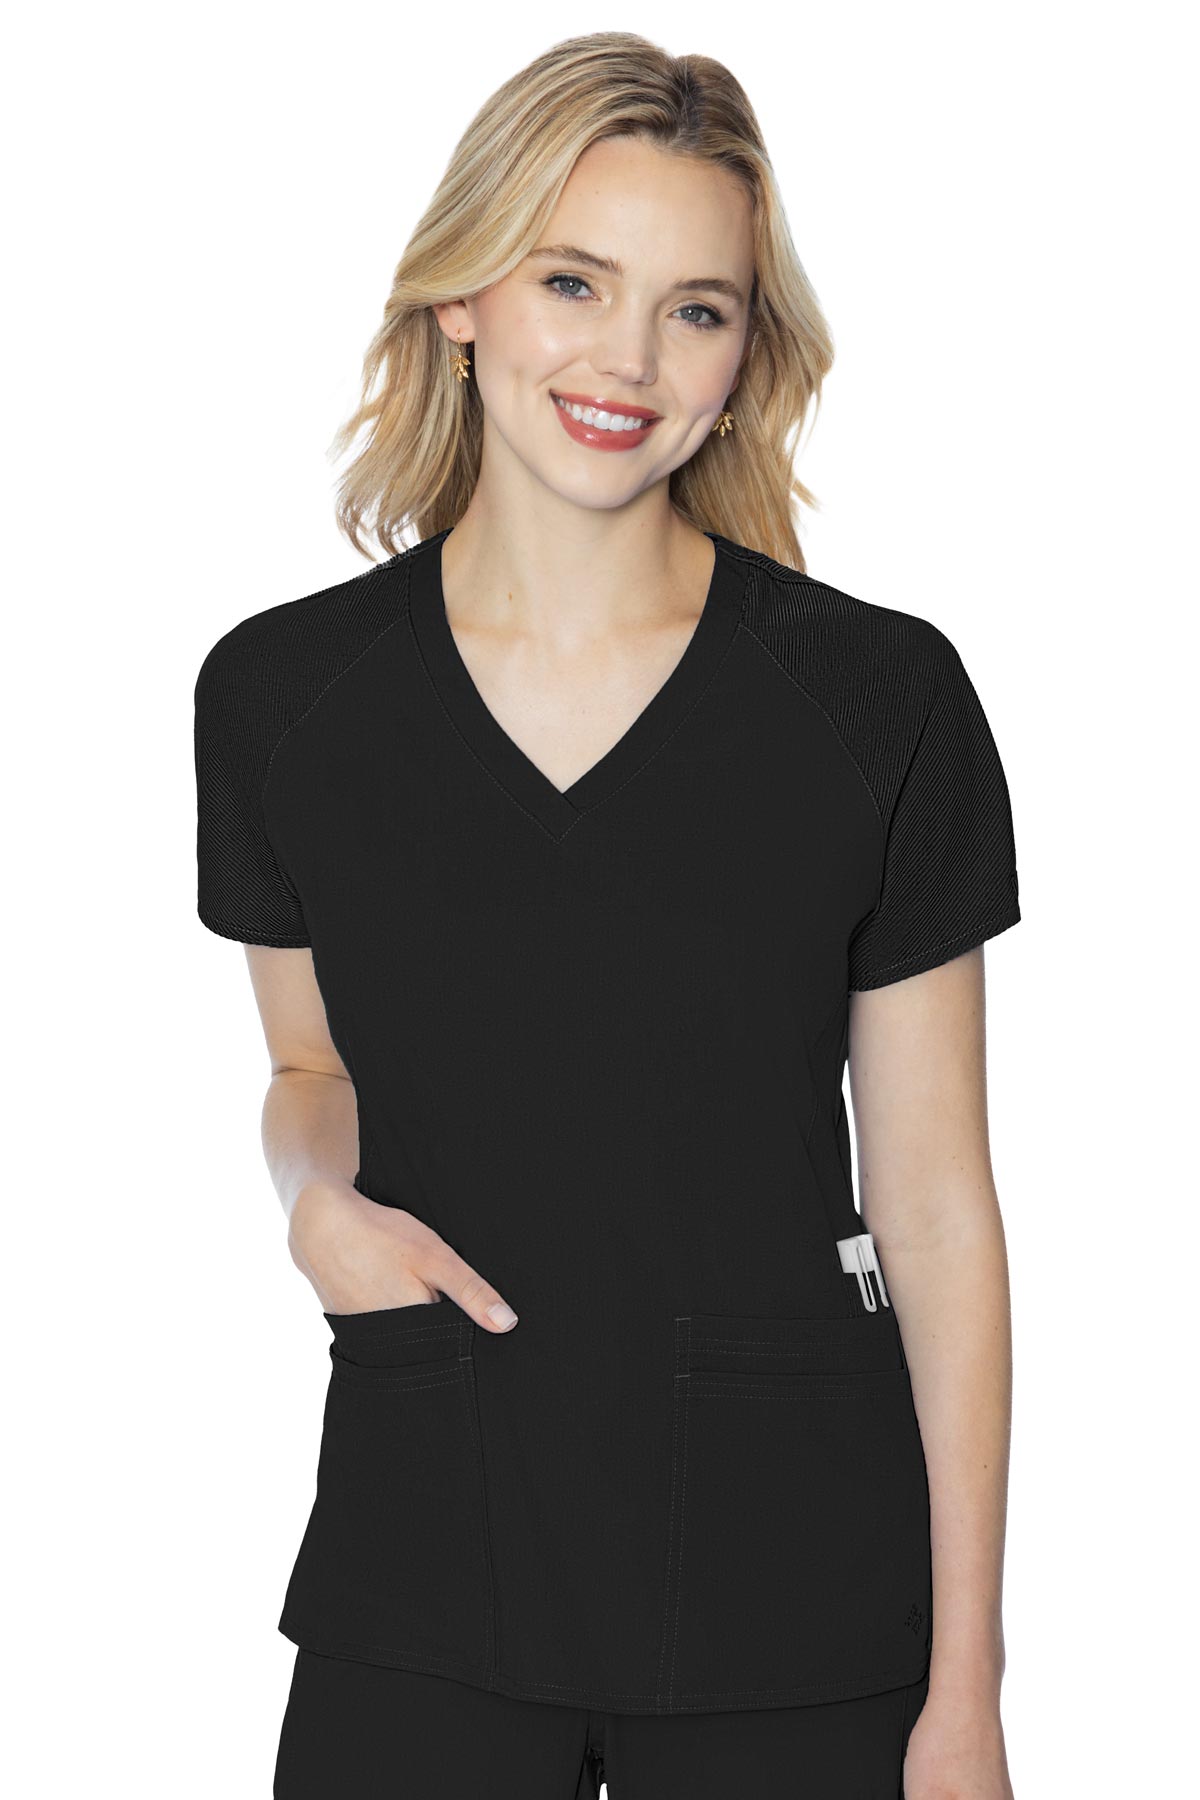 Med Couture Black TOP